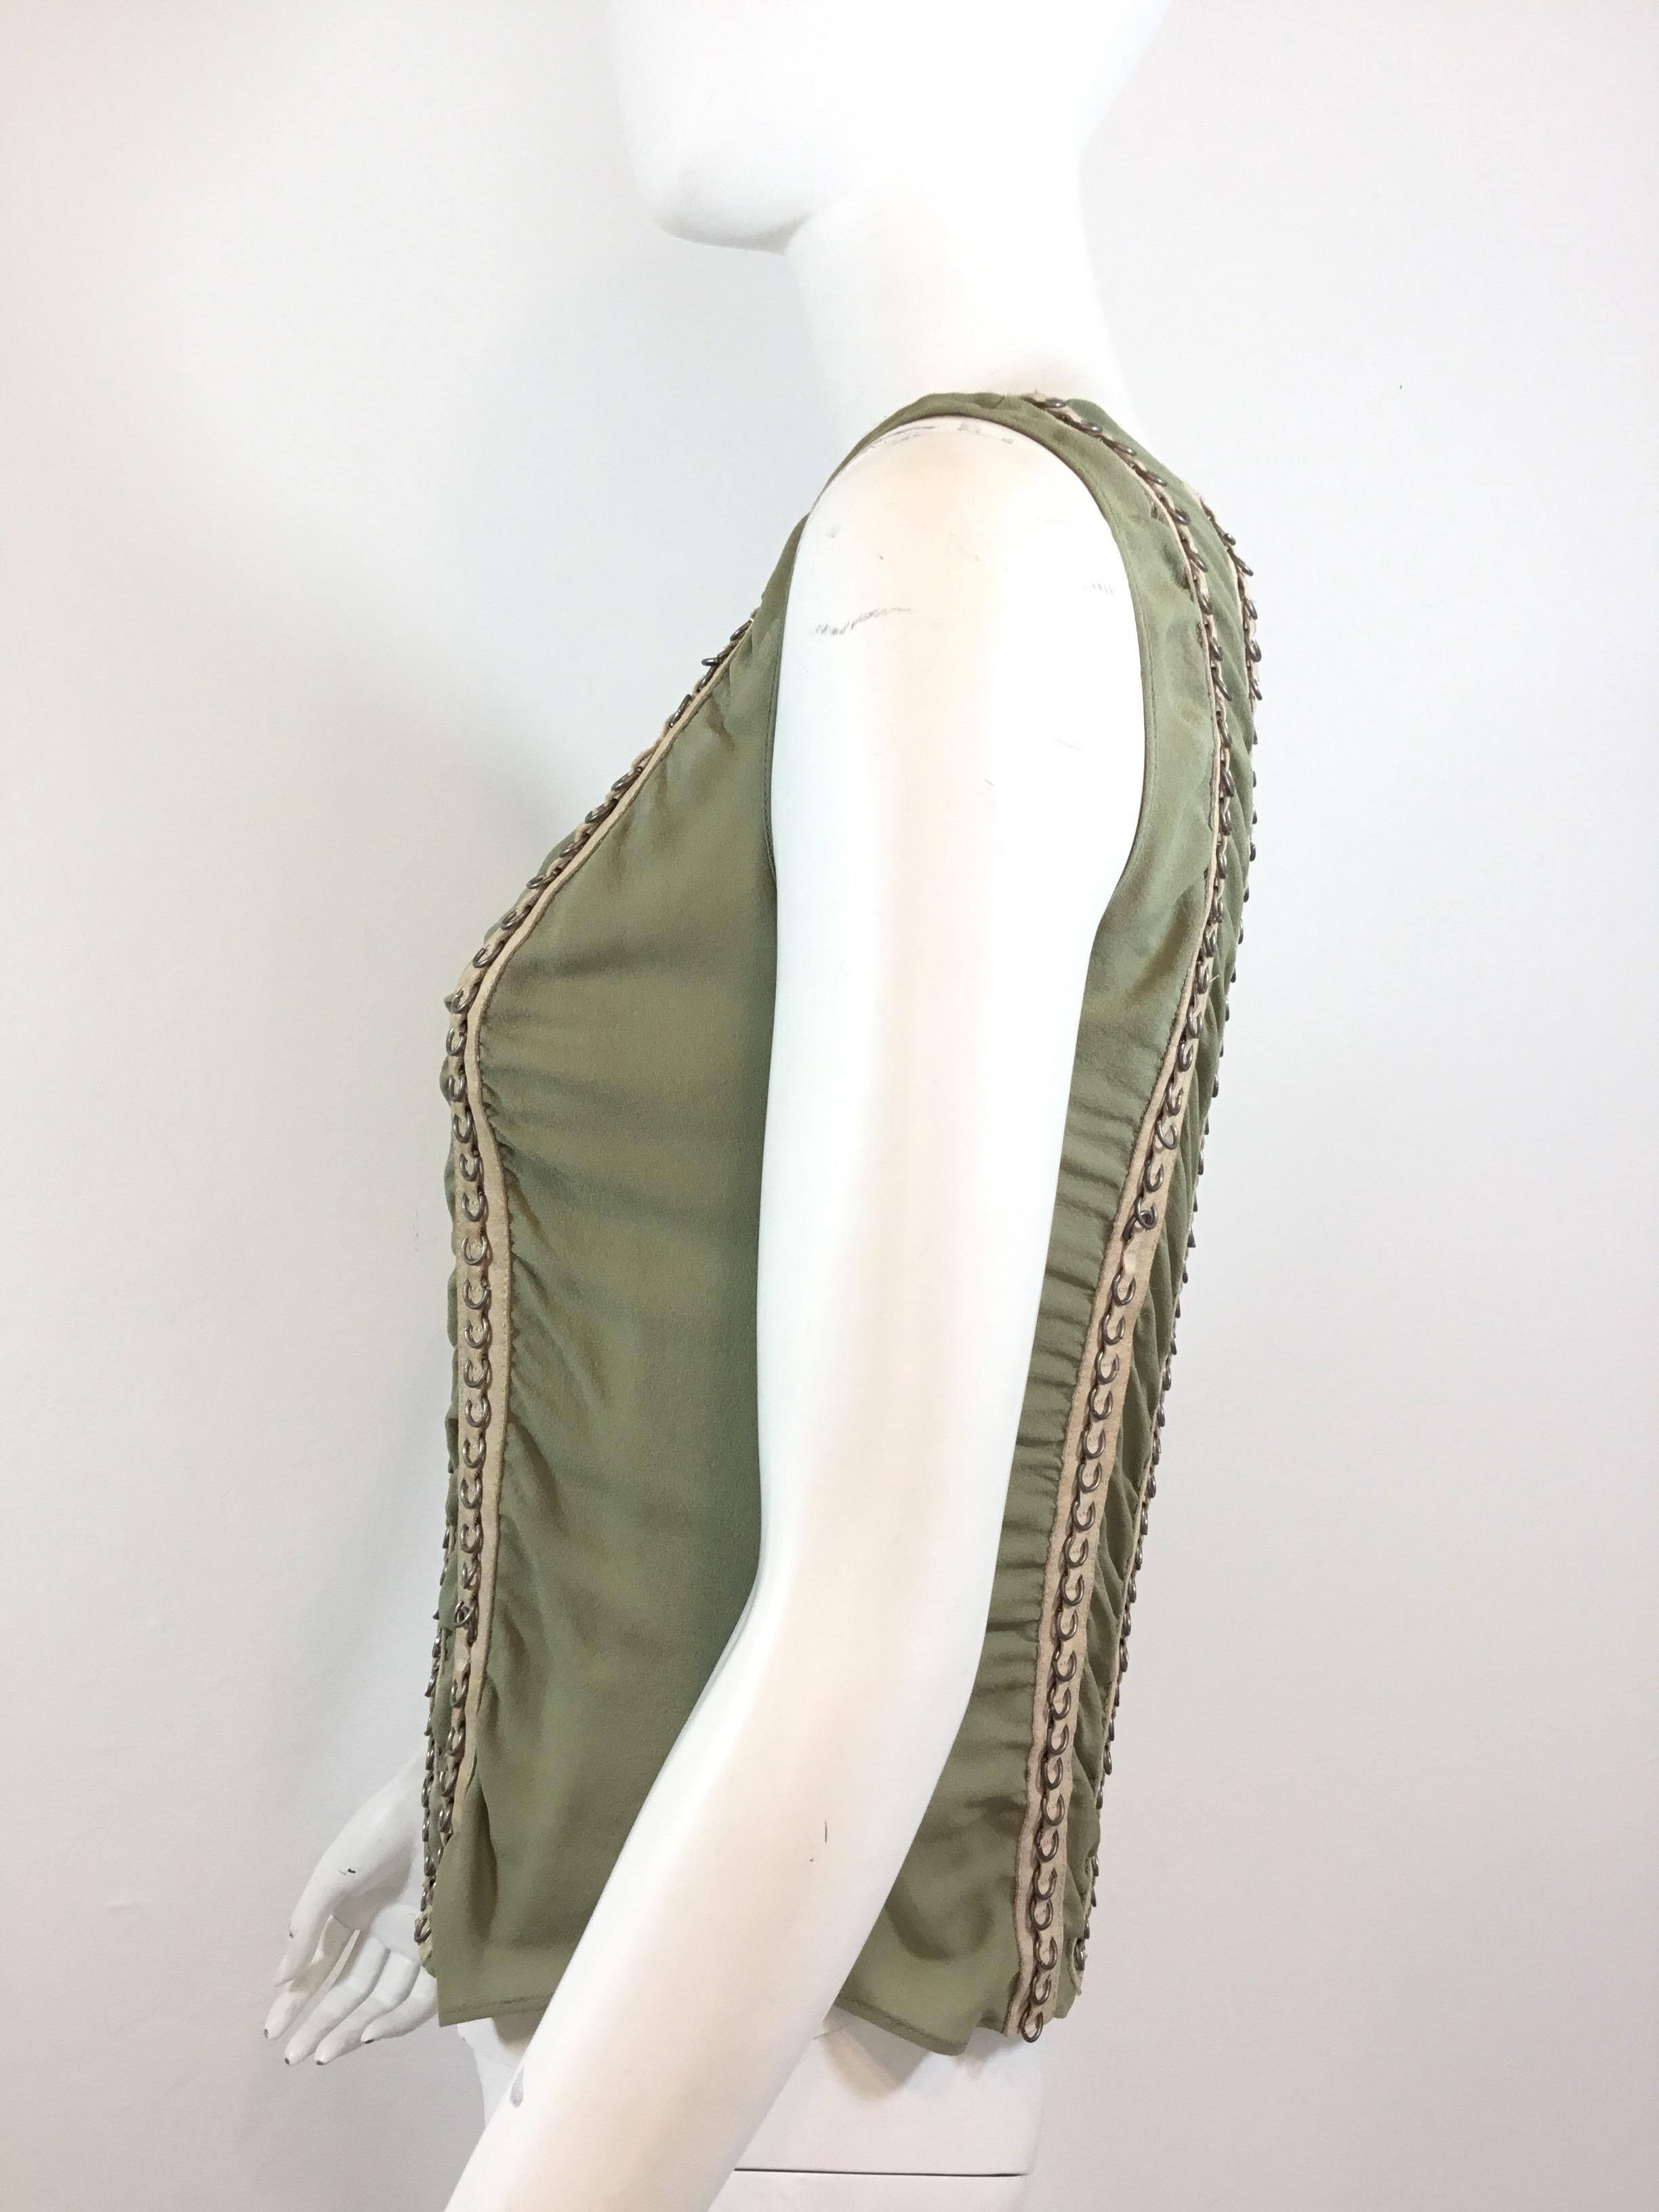 Chloé silk top featured in a pistachio green with a nude suede vertical stripe detail with silver tone rivets along the front and back. Top has a single button fastening at the back. 100% silk, made in France, size 38.

Bust 34”, length 21”